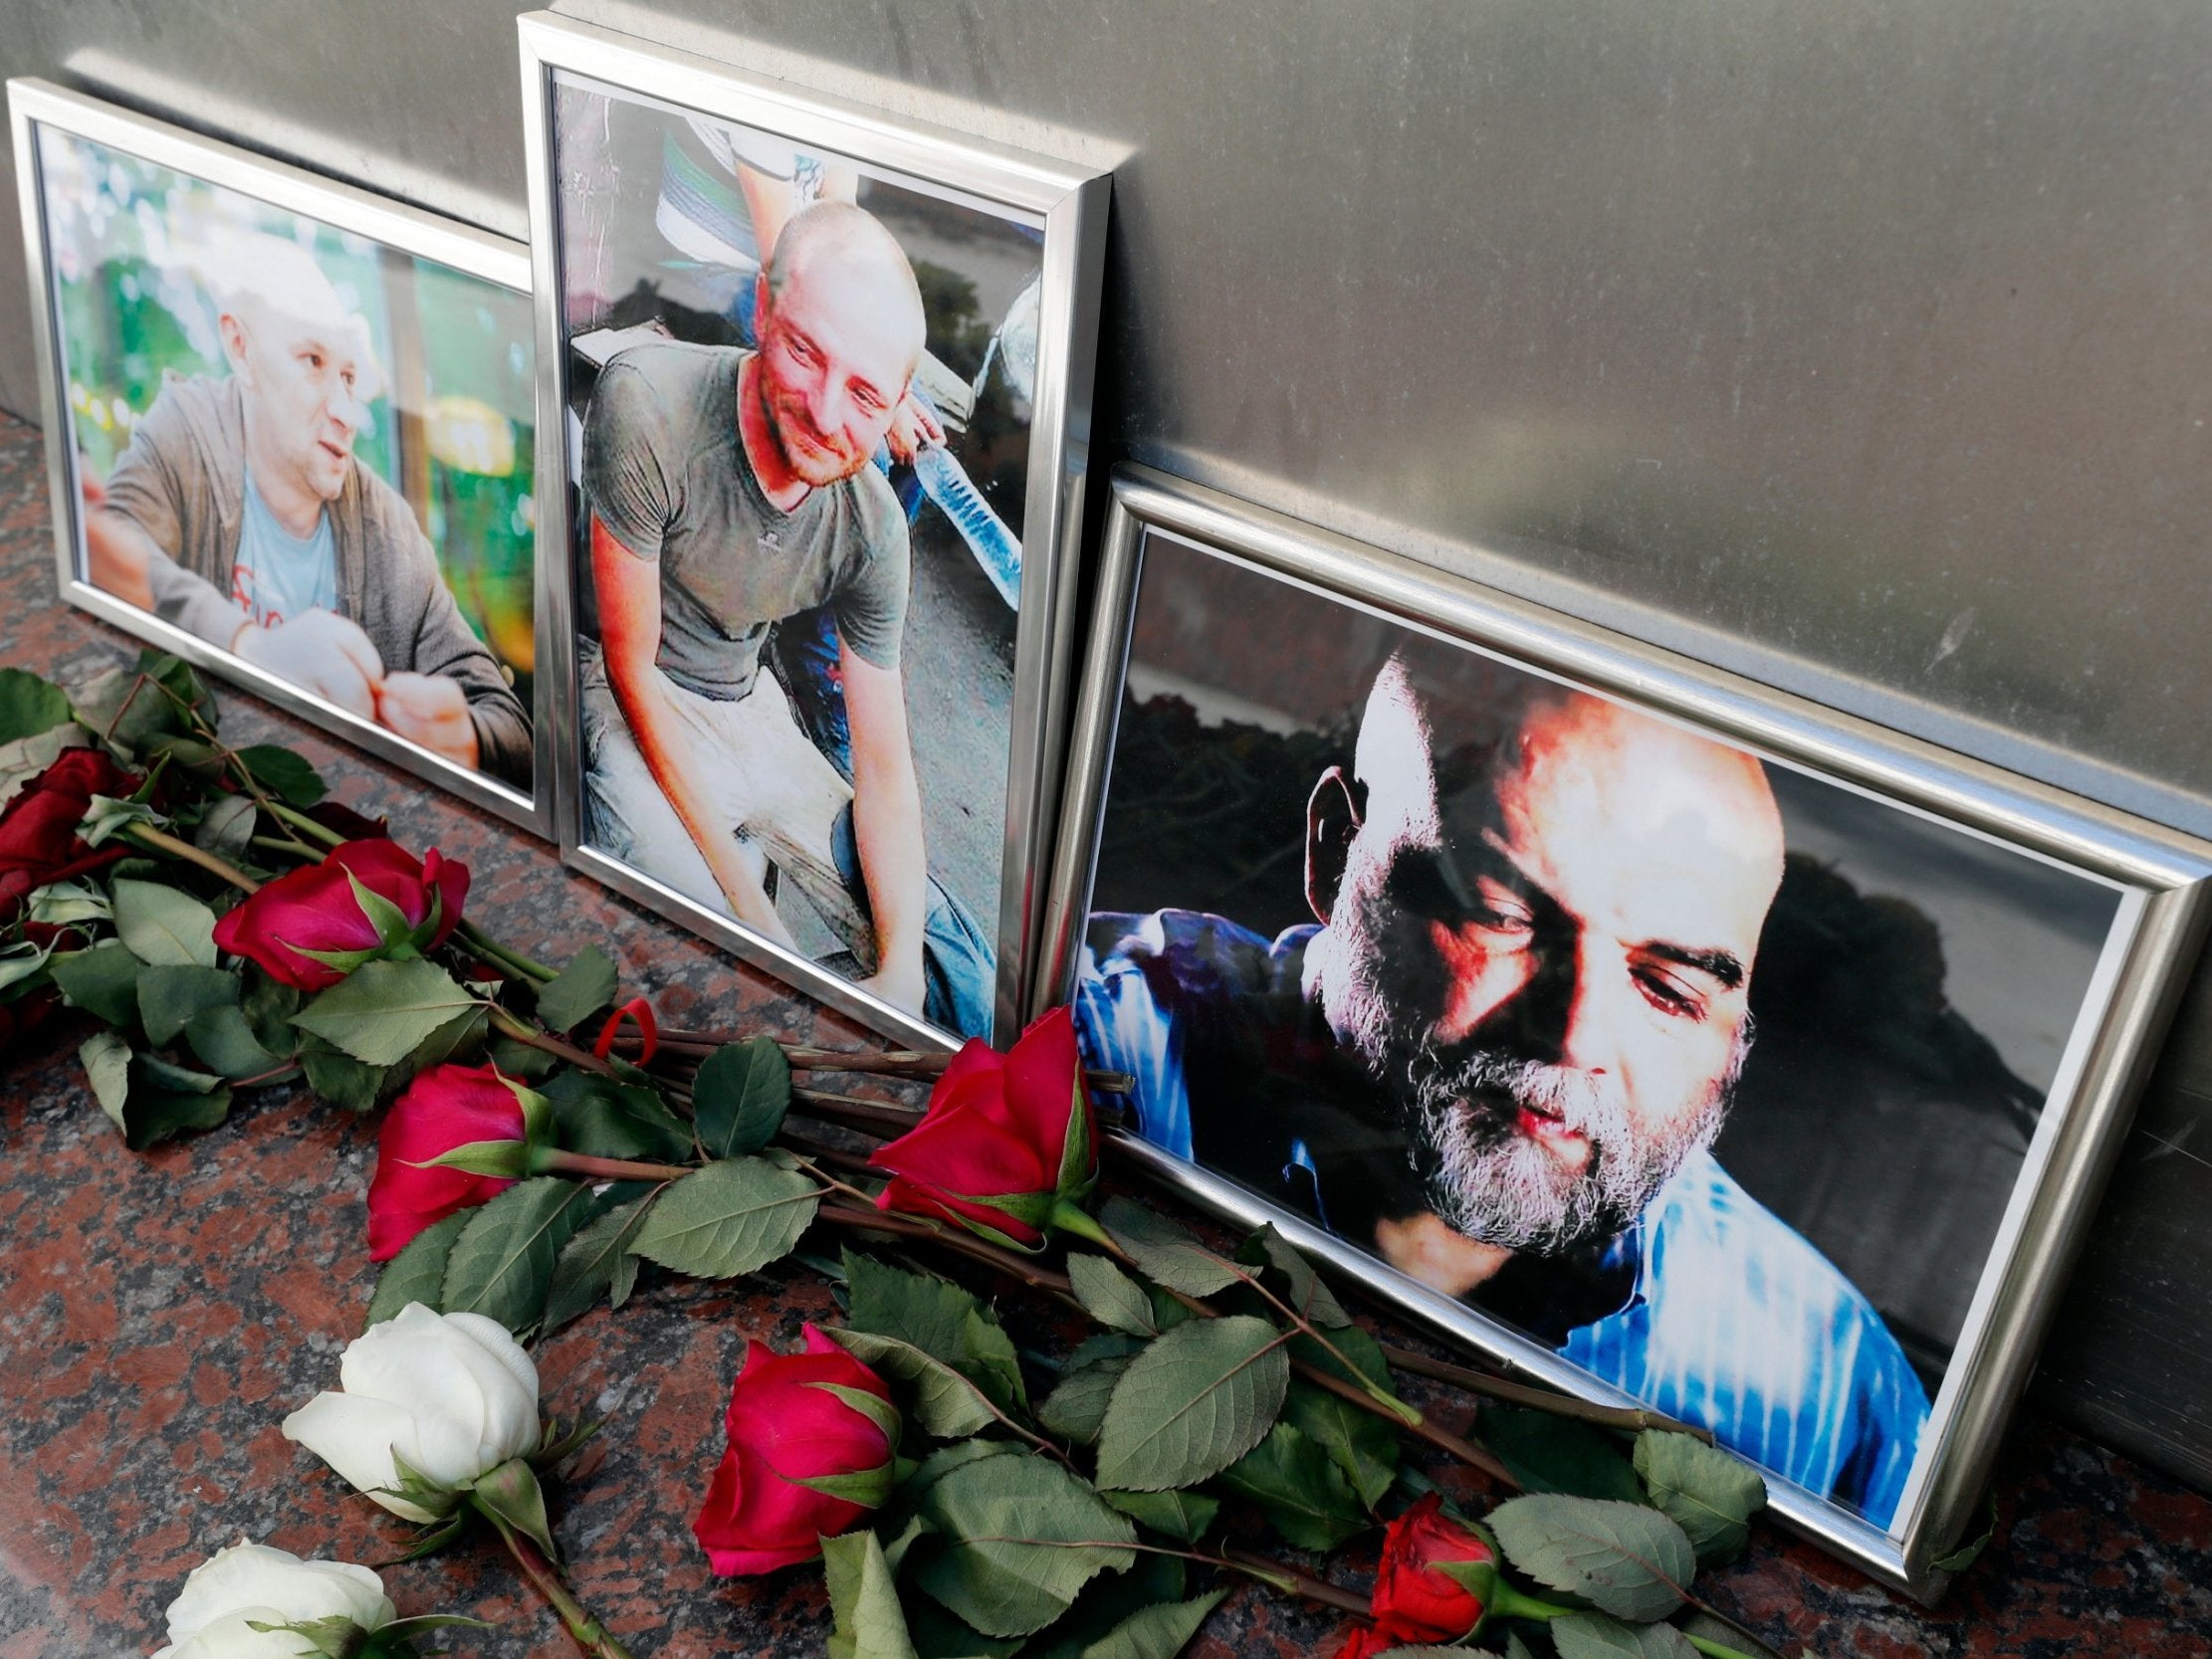 Flowers are placed as a last tribute in front of the photographs of Russian journalists Alexander Rastorguyev (L), Kirill Radchenko (C) and Orkhan Dzhemal (R) outside the Central House of Journalists in Moscow, Russia